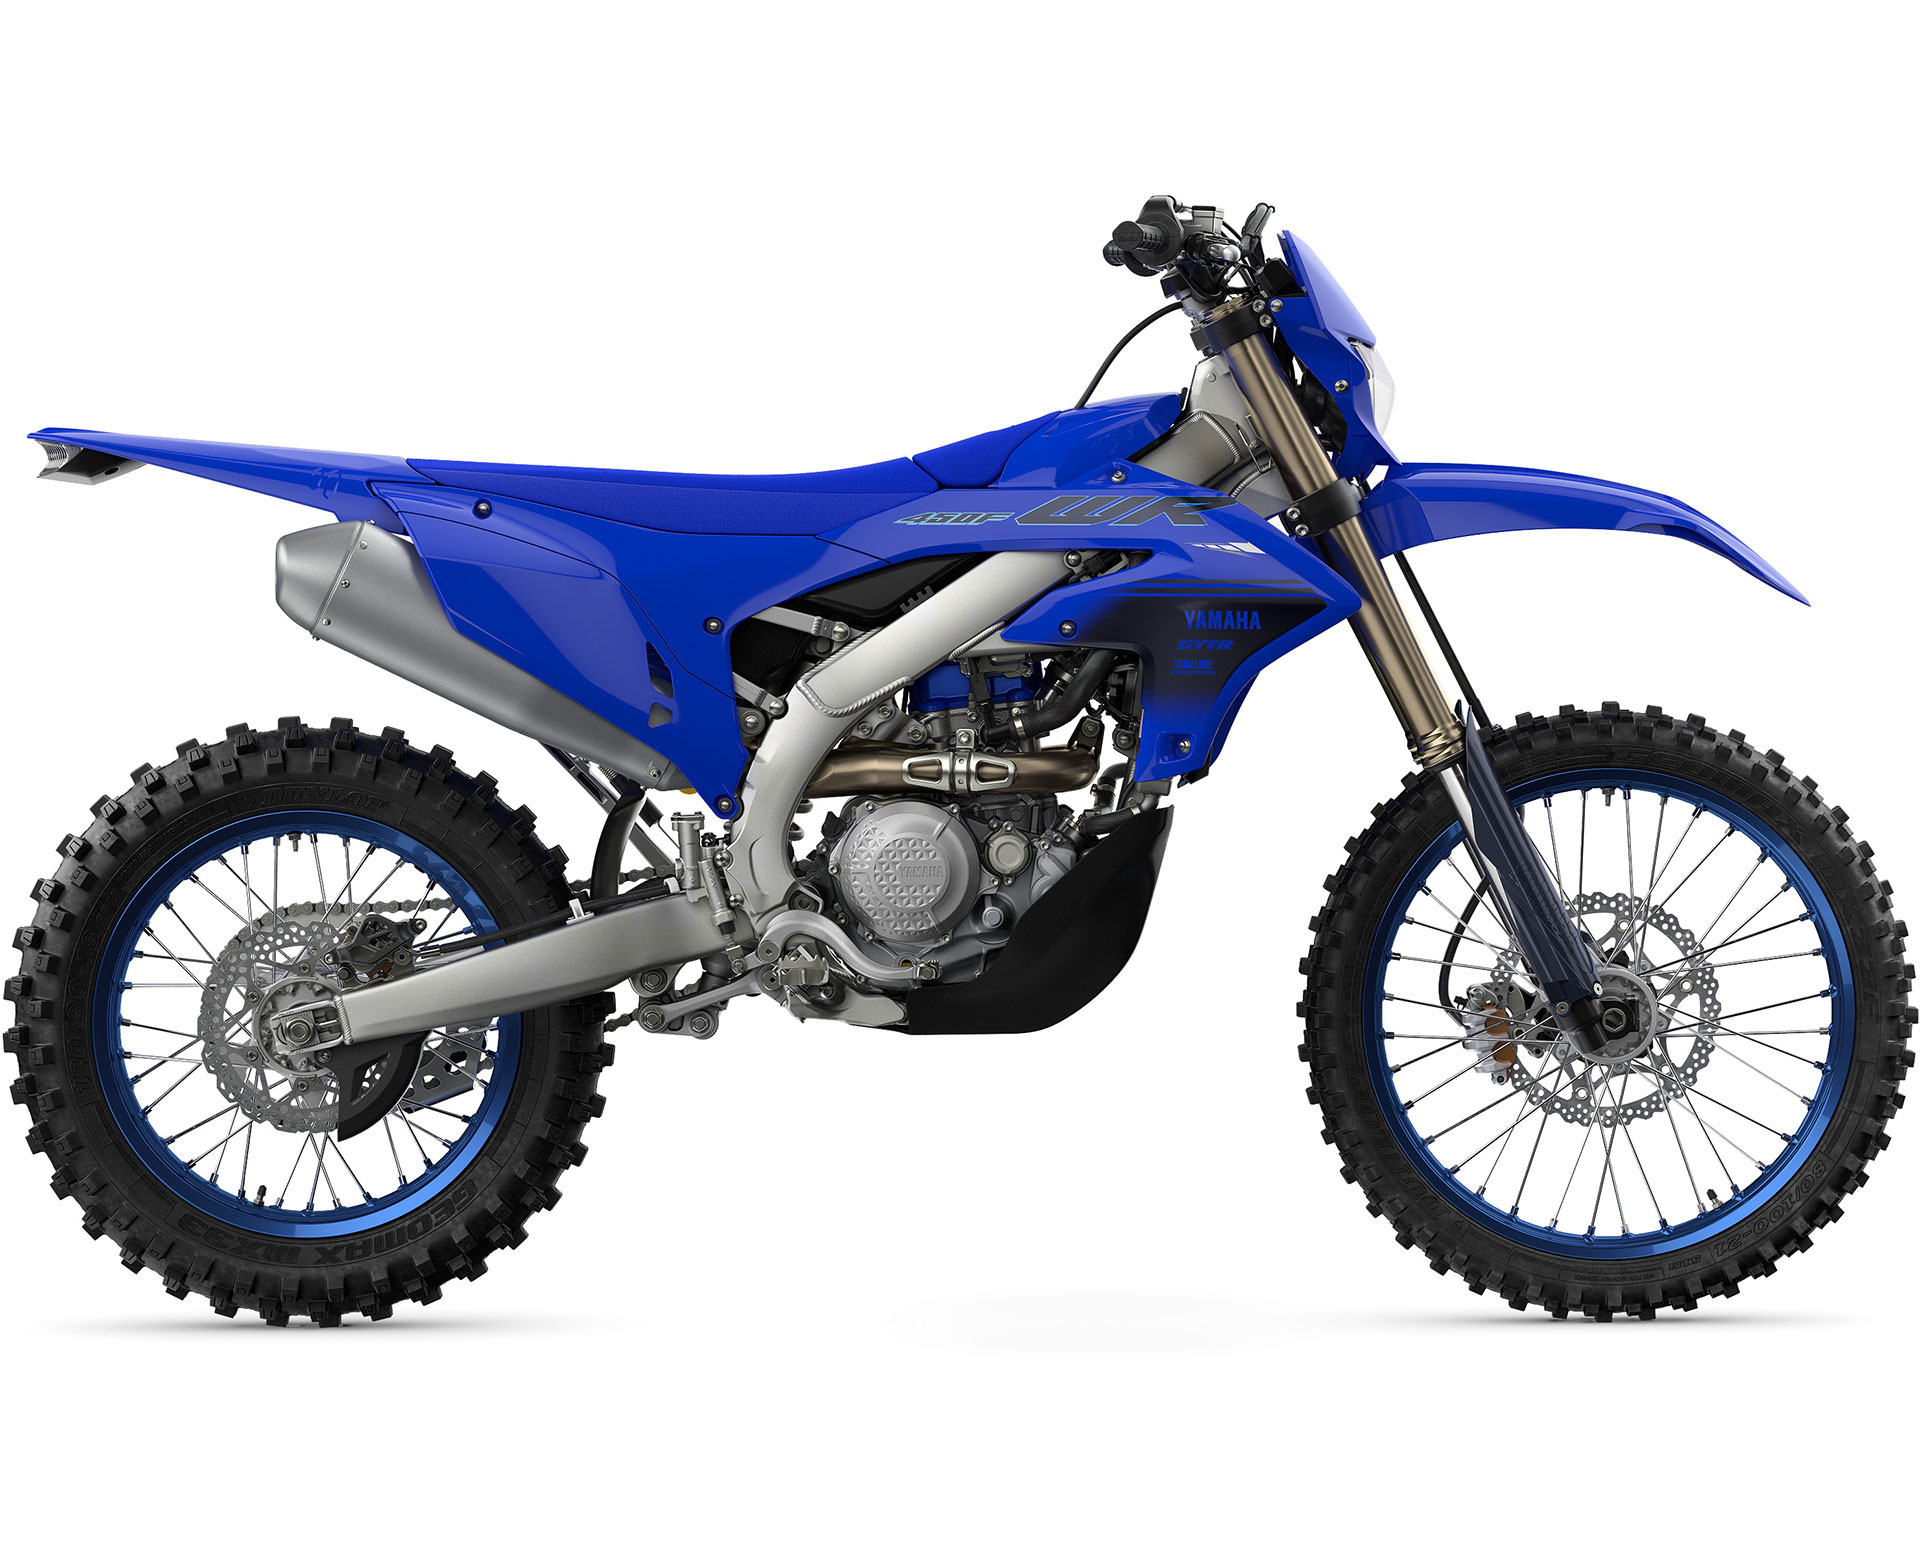 Thumbnail of your customized 2024 WR450F